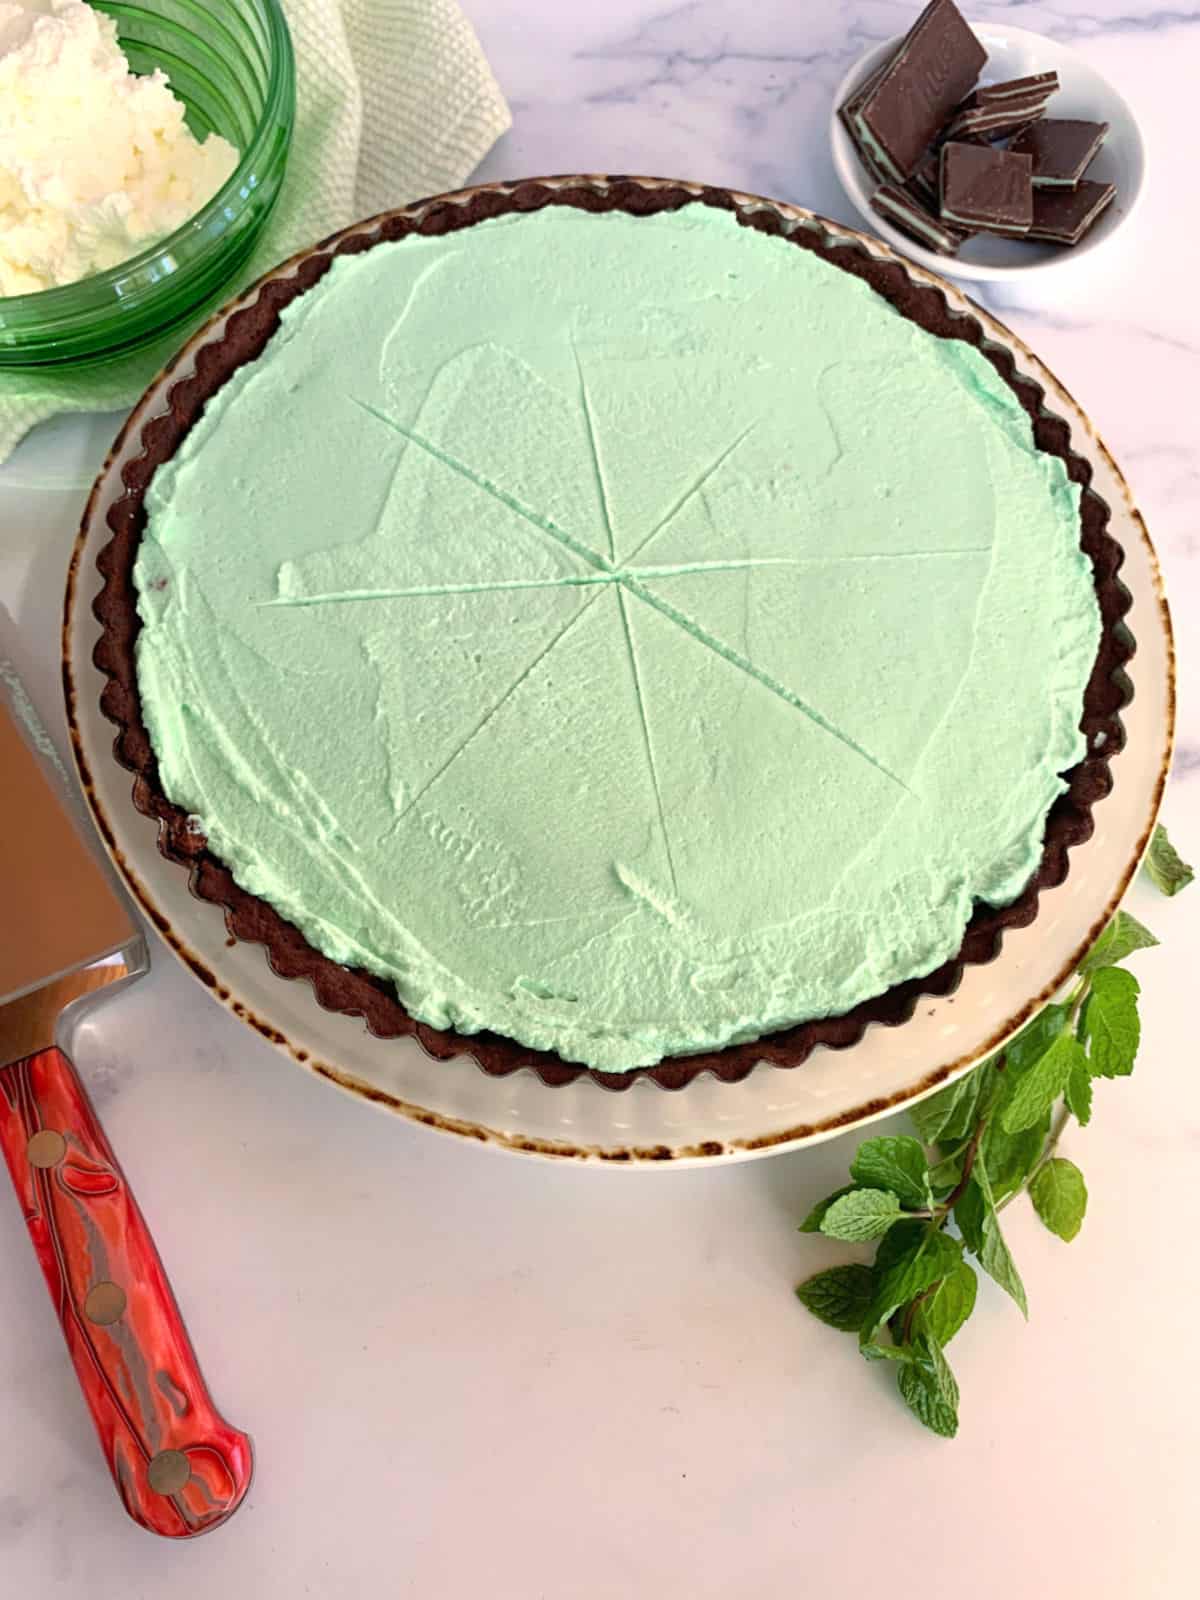 A mint tart with Andes candies and whipped cream next to it.